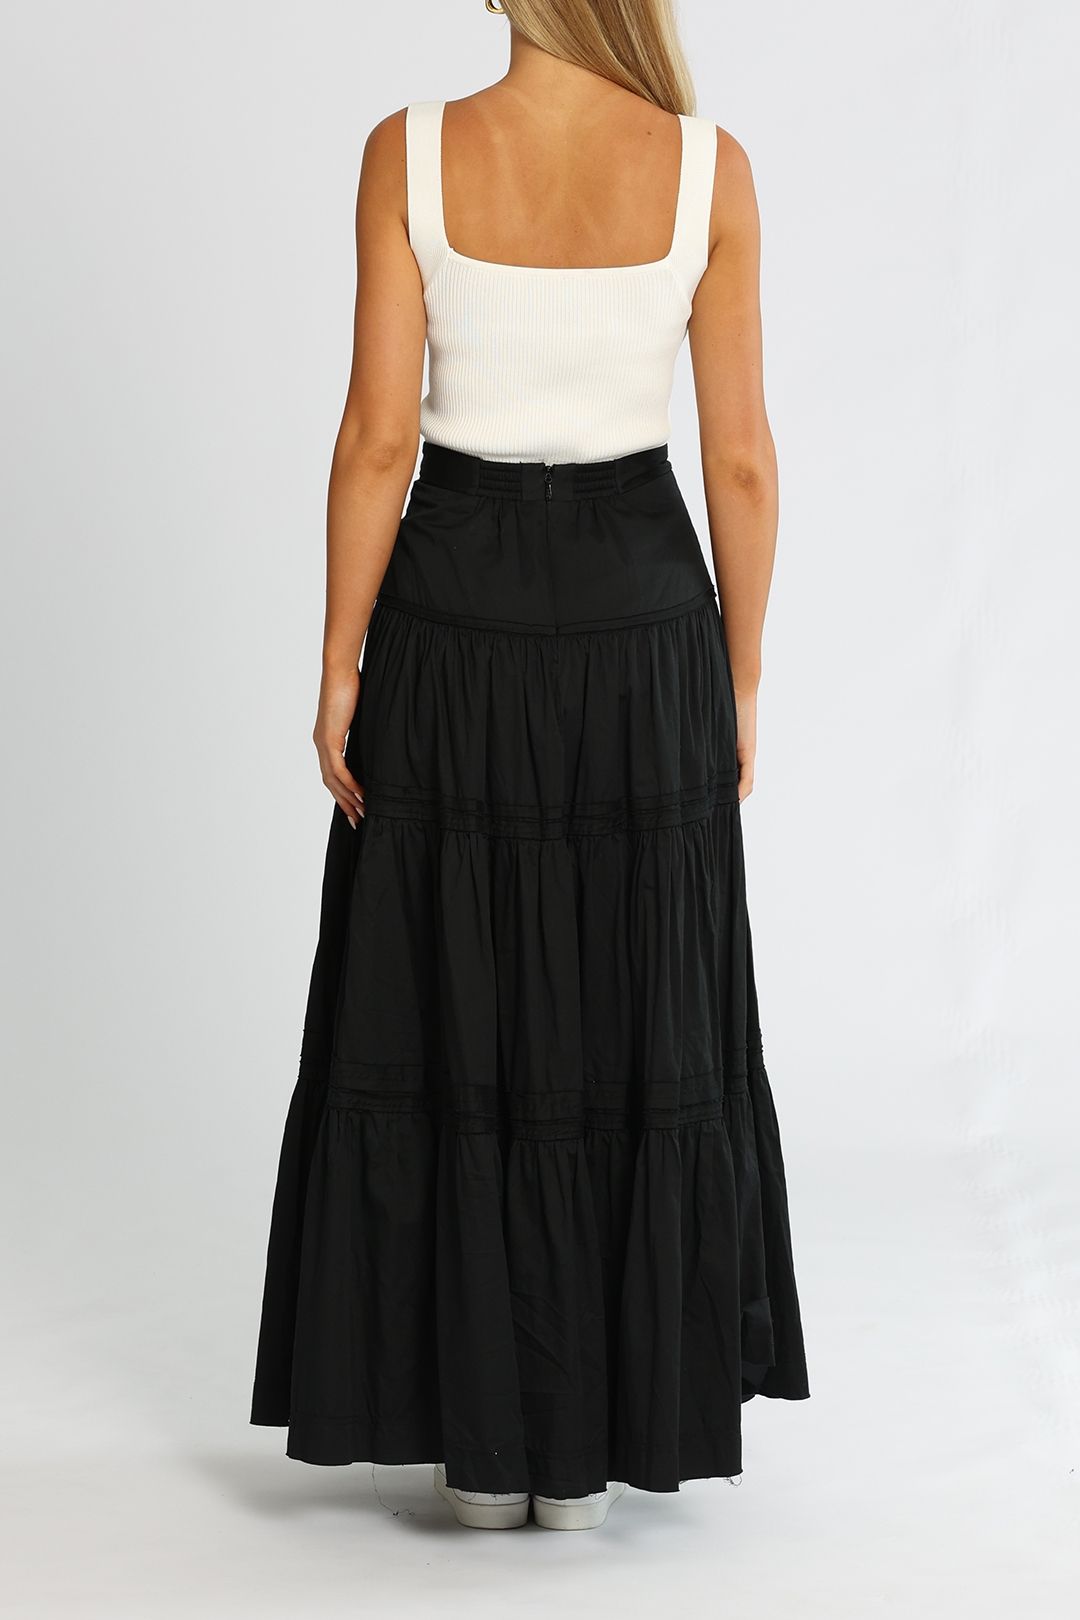 AJE Recurrence Maxi Skirt A Line